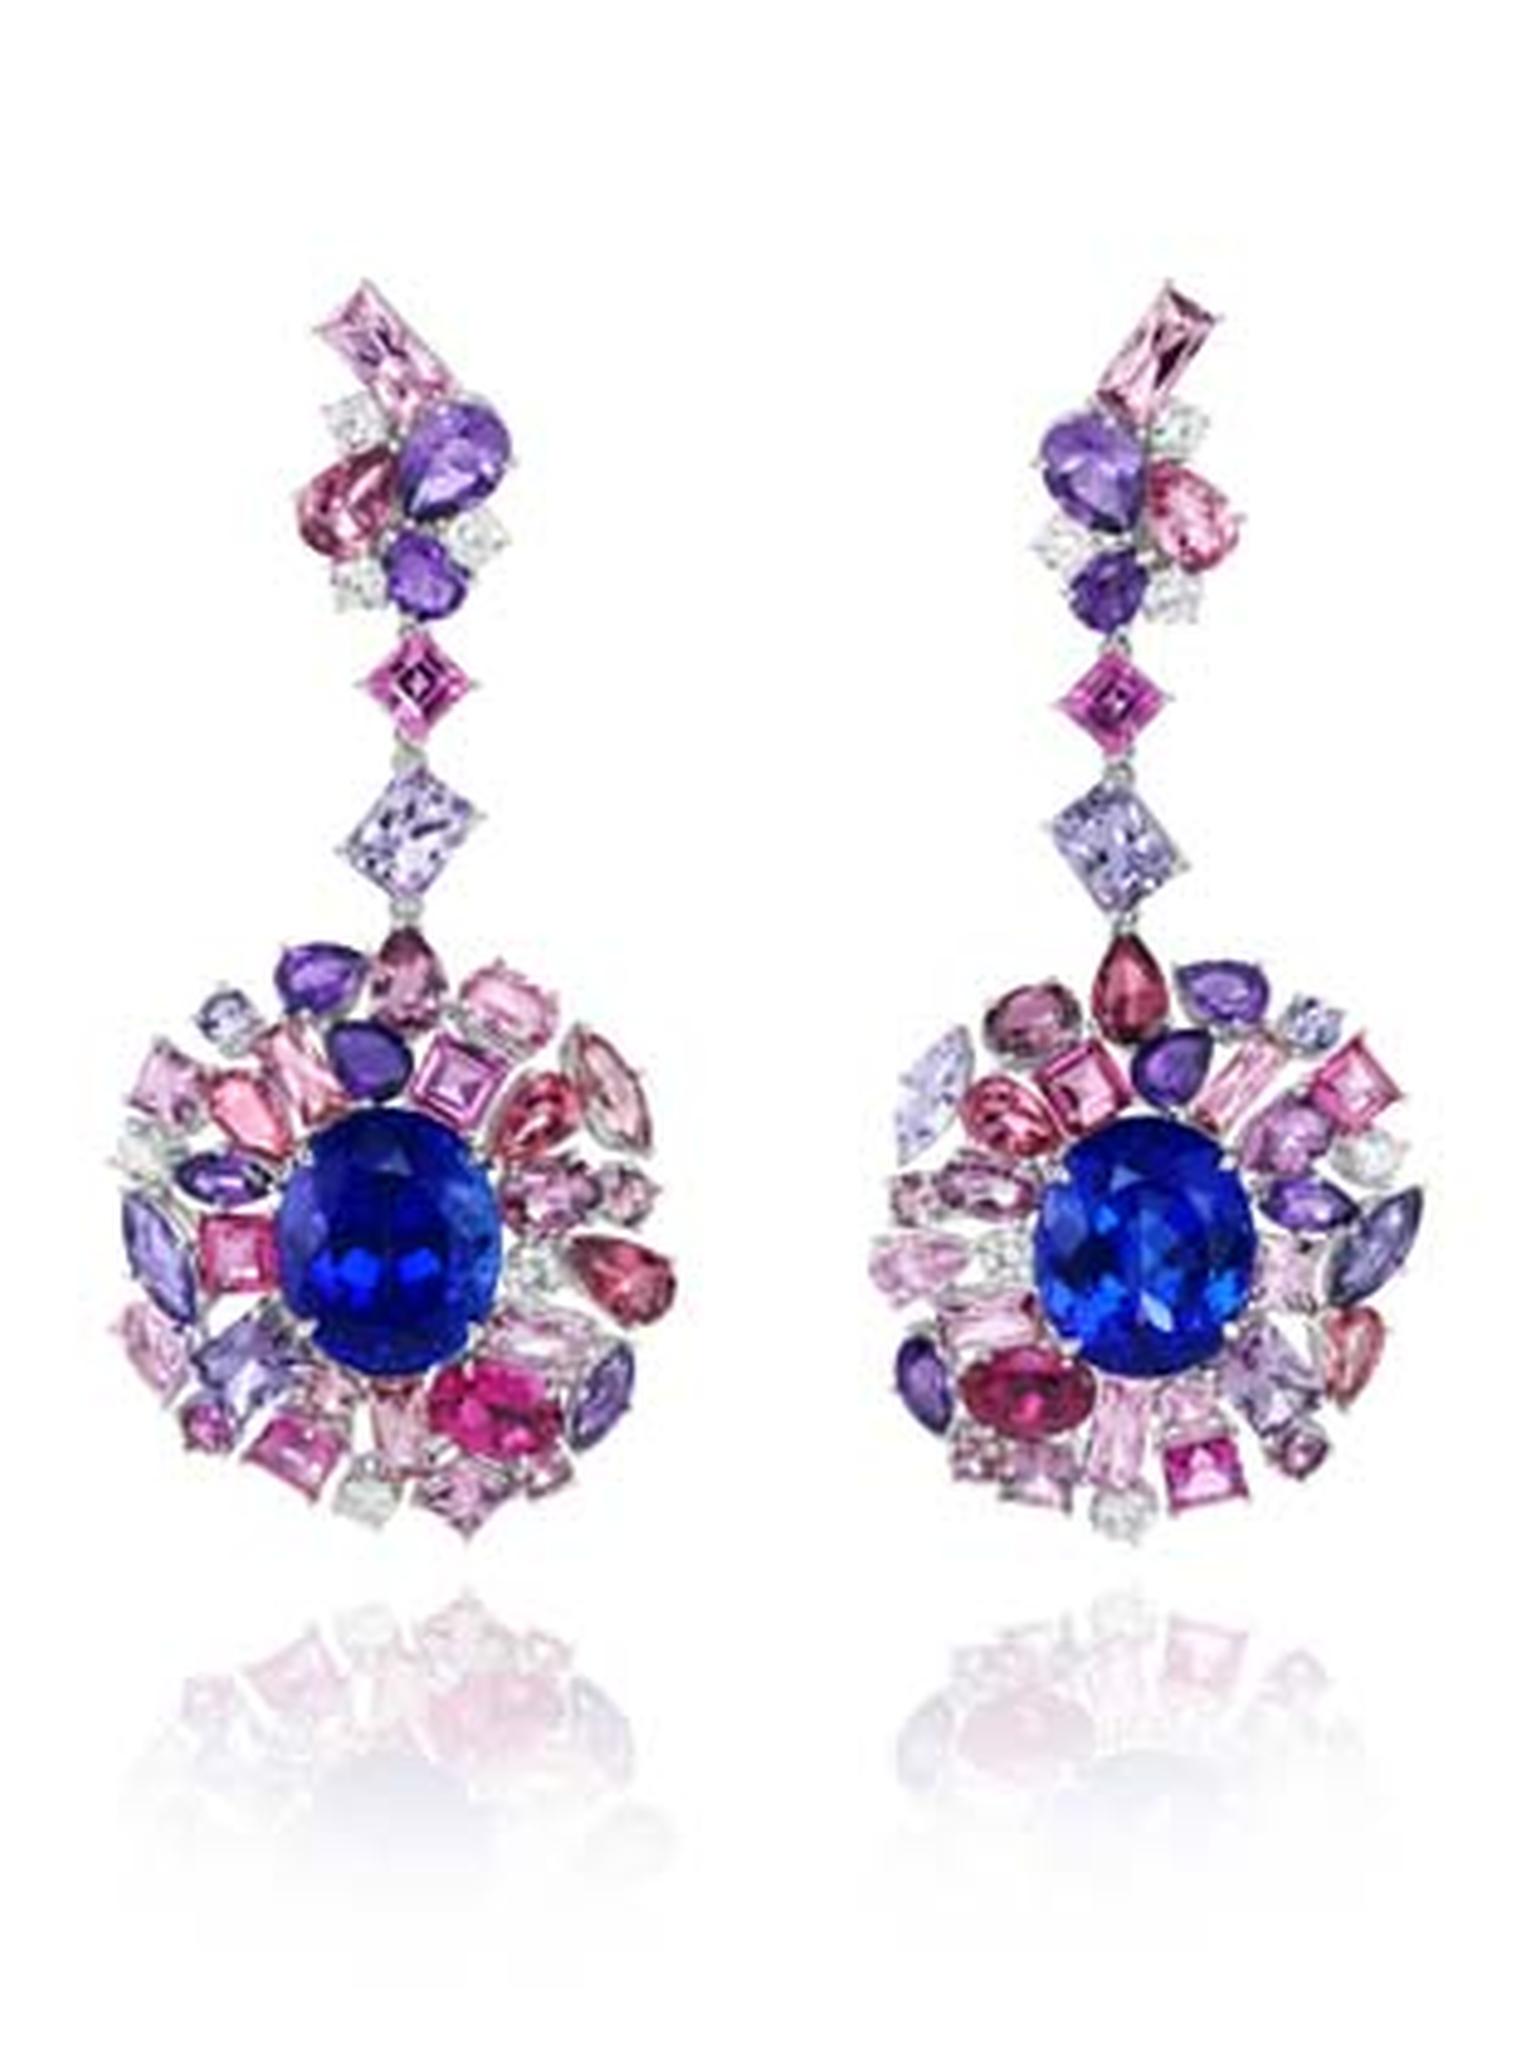 849374-1001 Tanzanite Earrings  from the Red Carpet Collection 2013.jpg